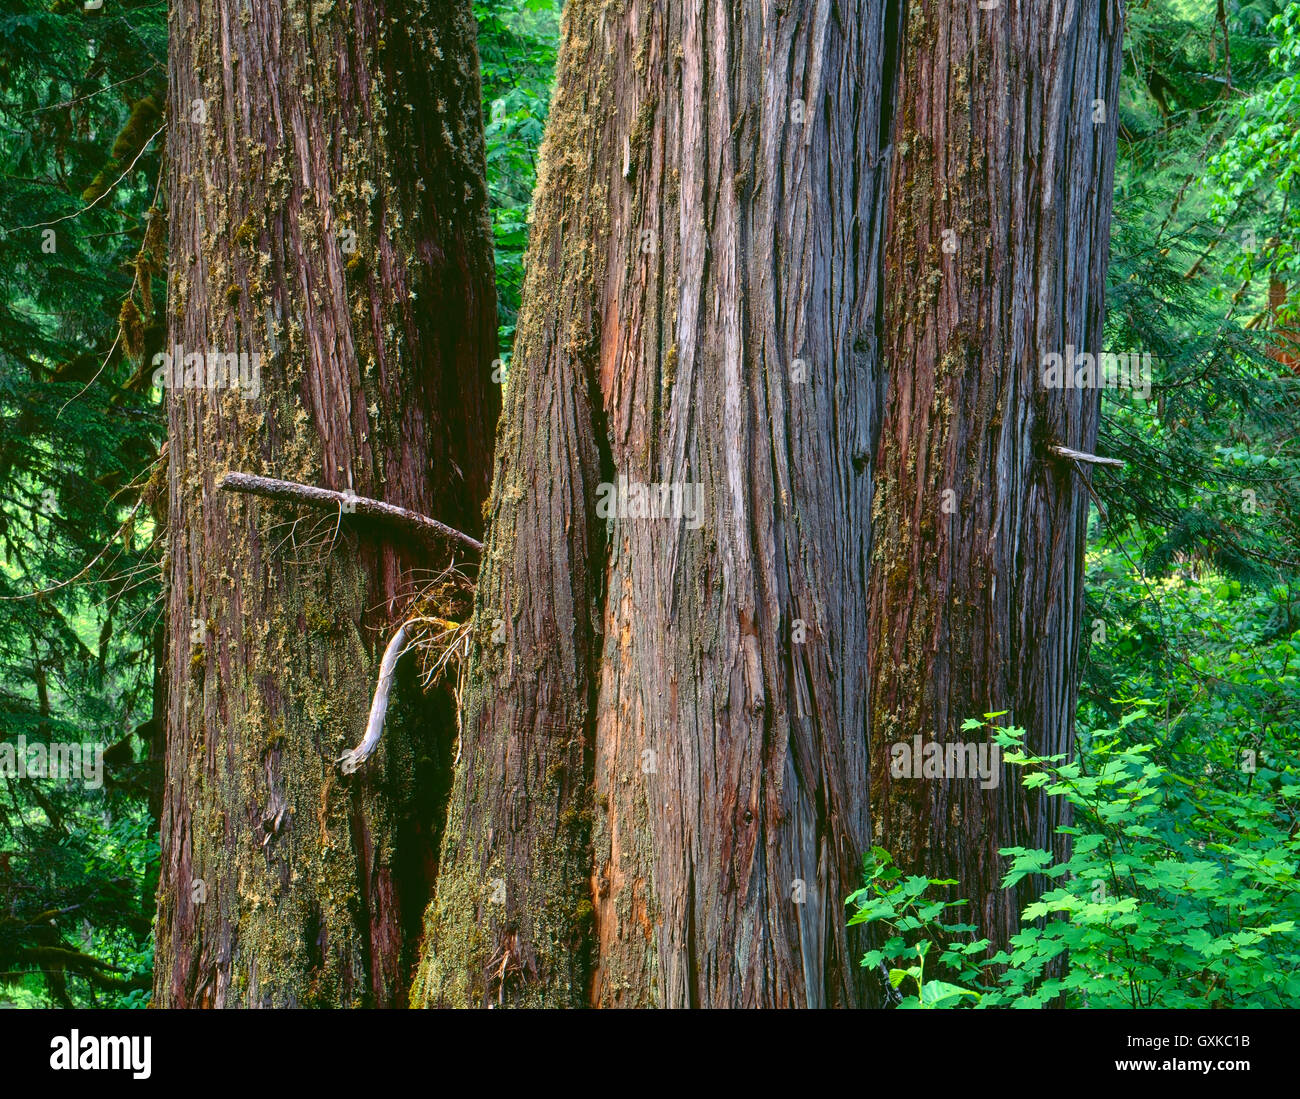 USA, Oregon, Willamette National Forest, Middle Santiam Wilderness, Trio of ancient western red cedars in old growth forest. Stock Photo